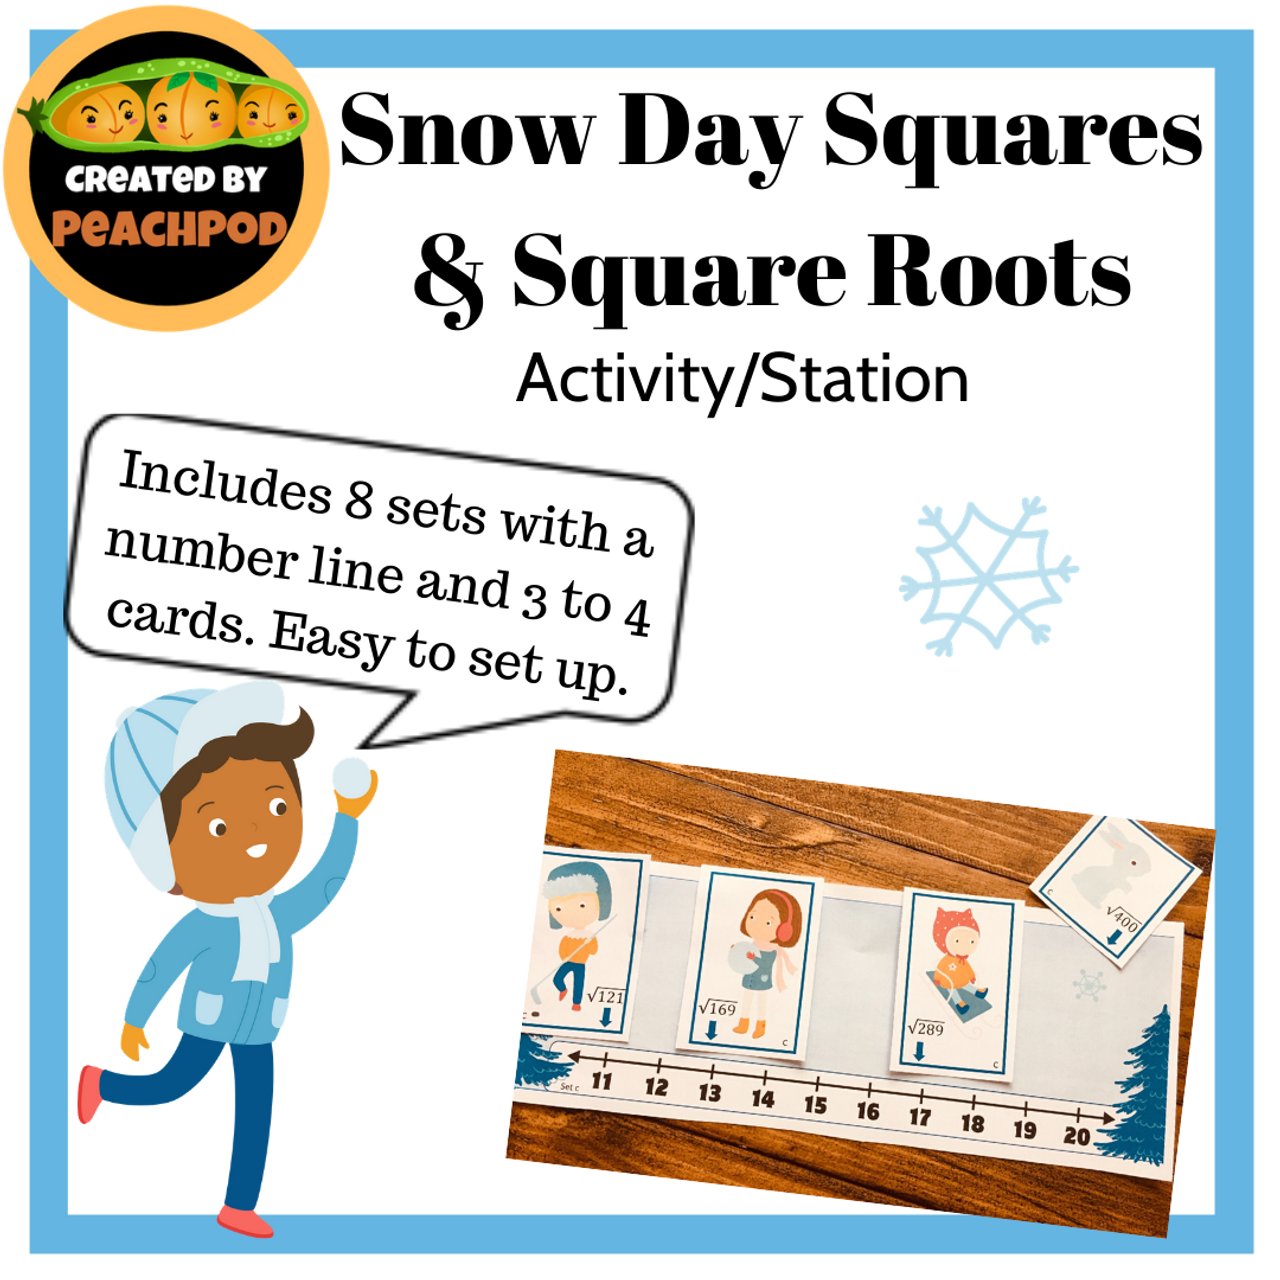 Snow Day Squares &  Square Roots: Activity/Station